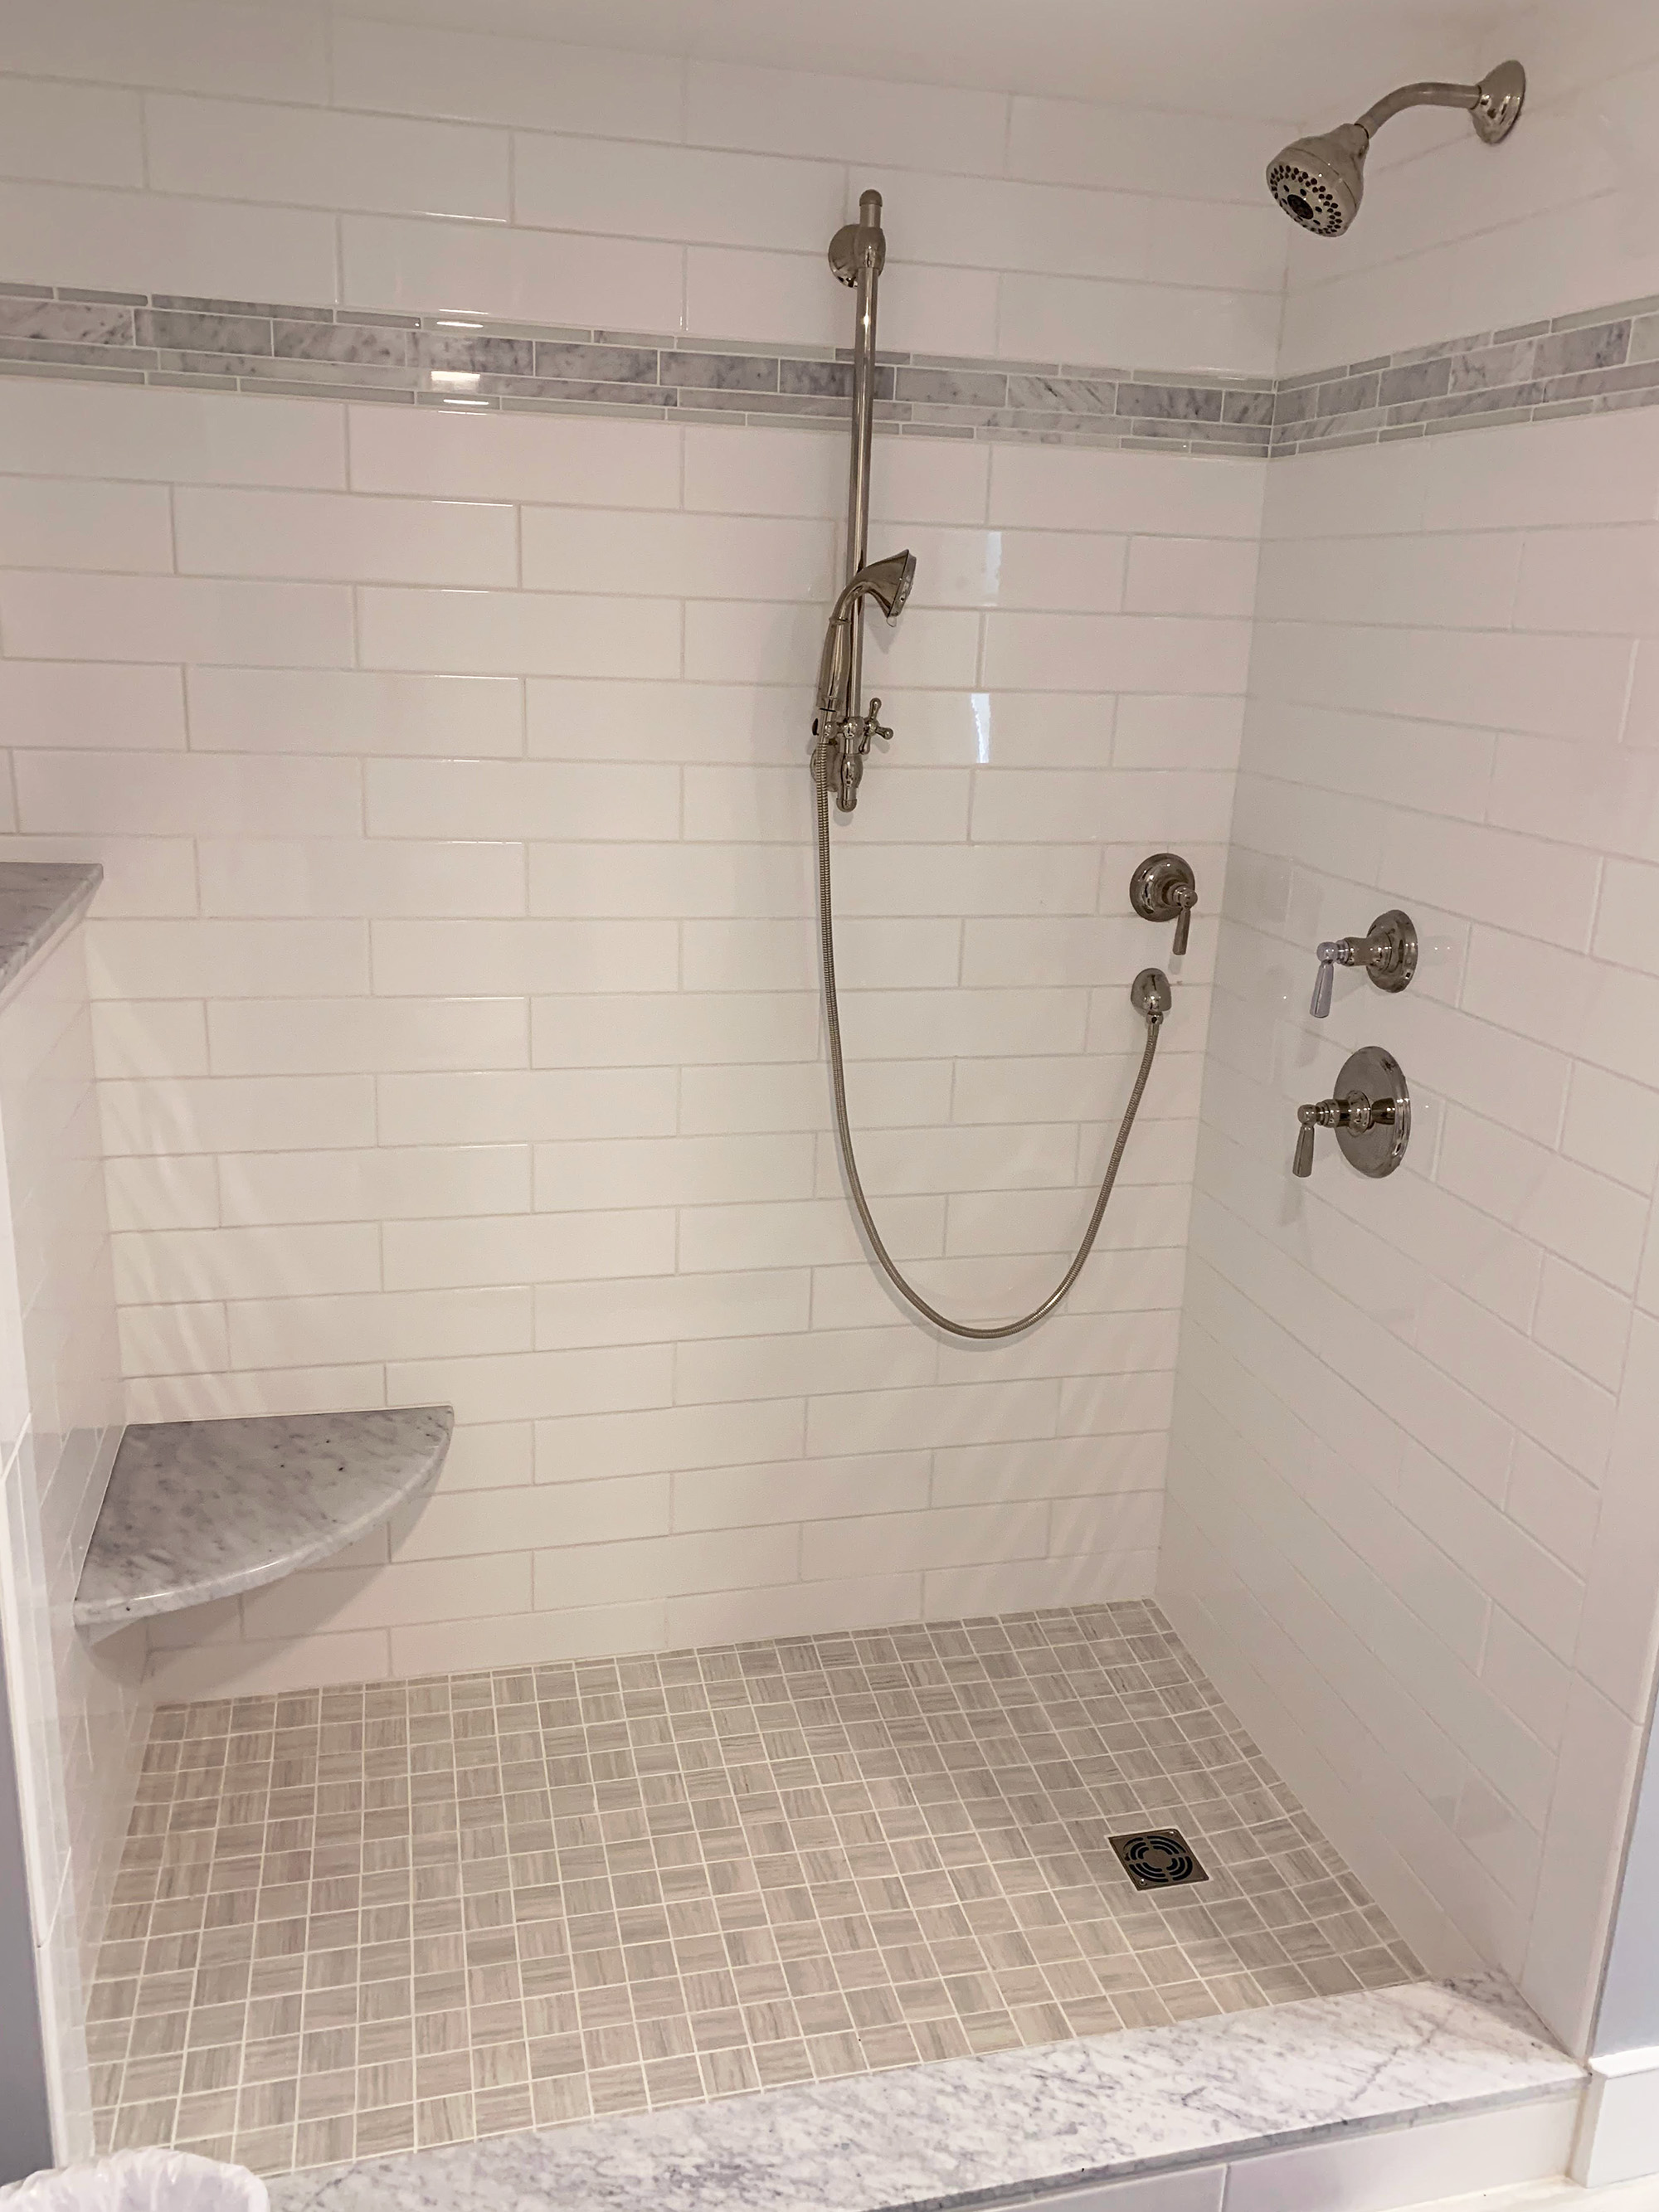 Walk-in shower with white tile and a glass door.